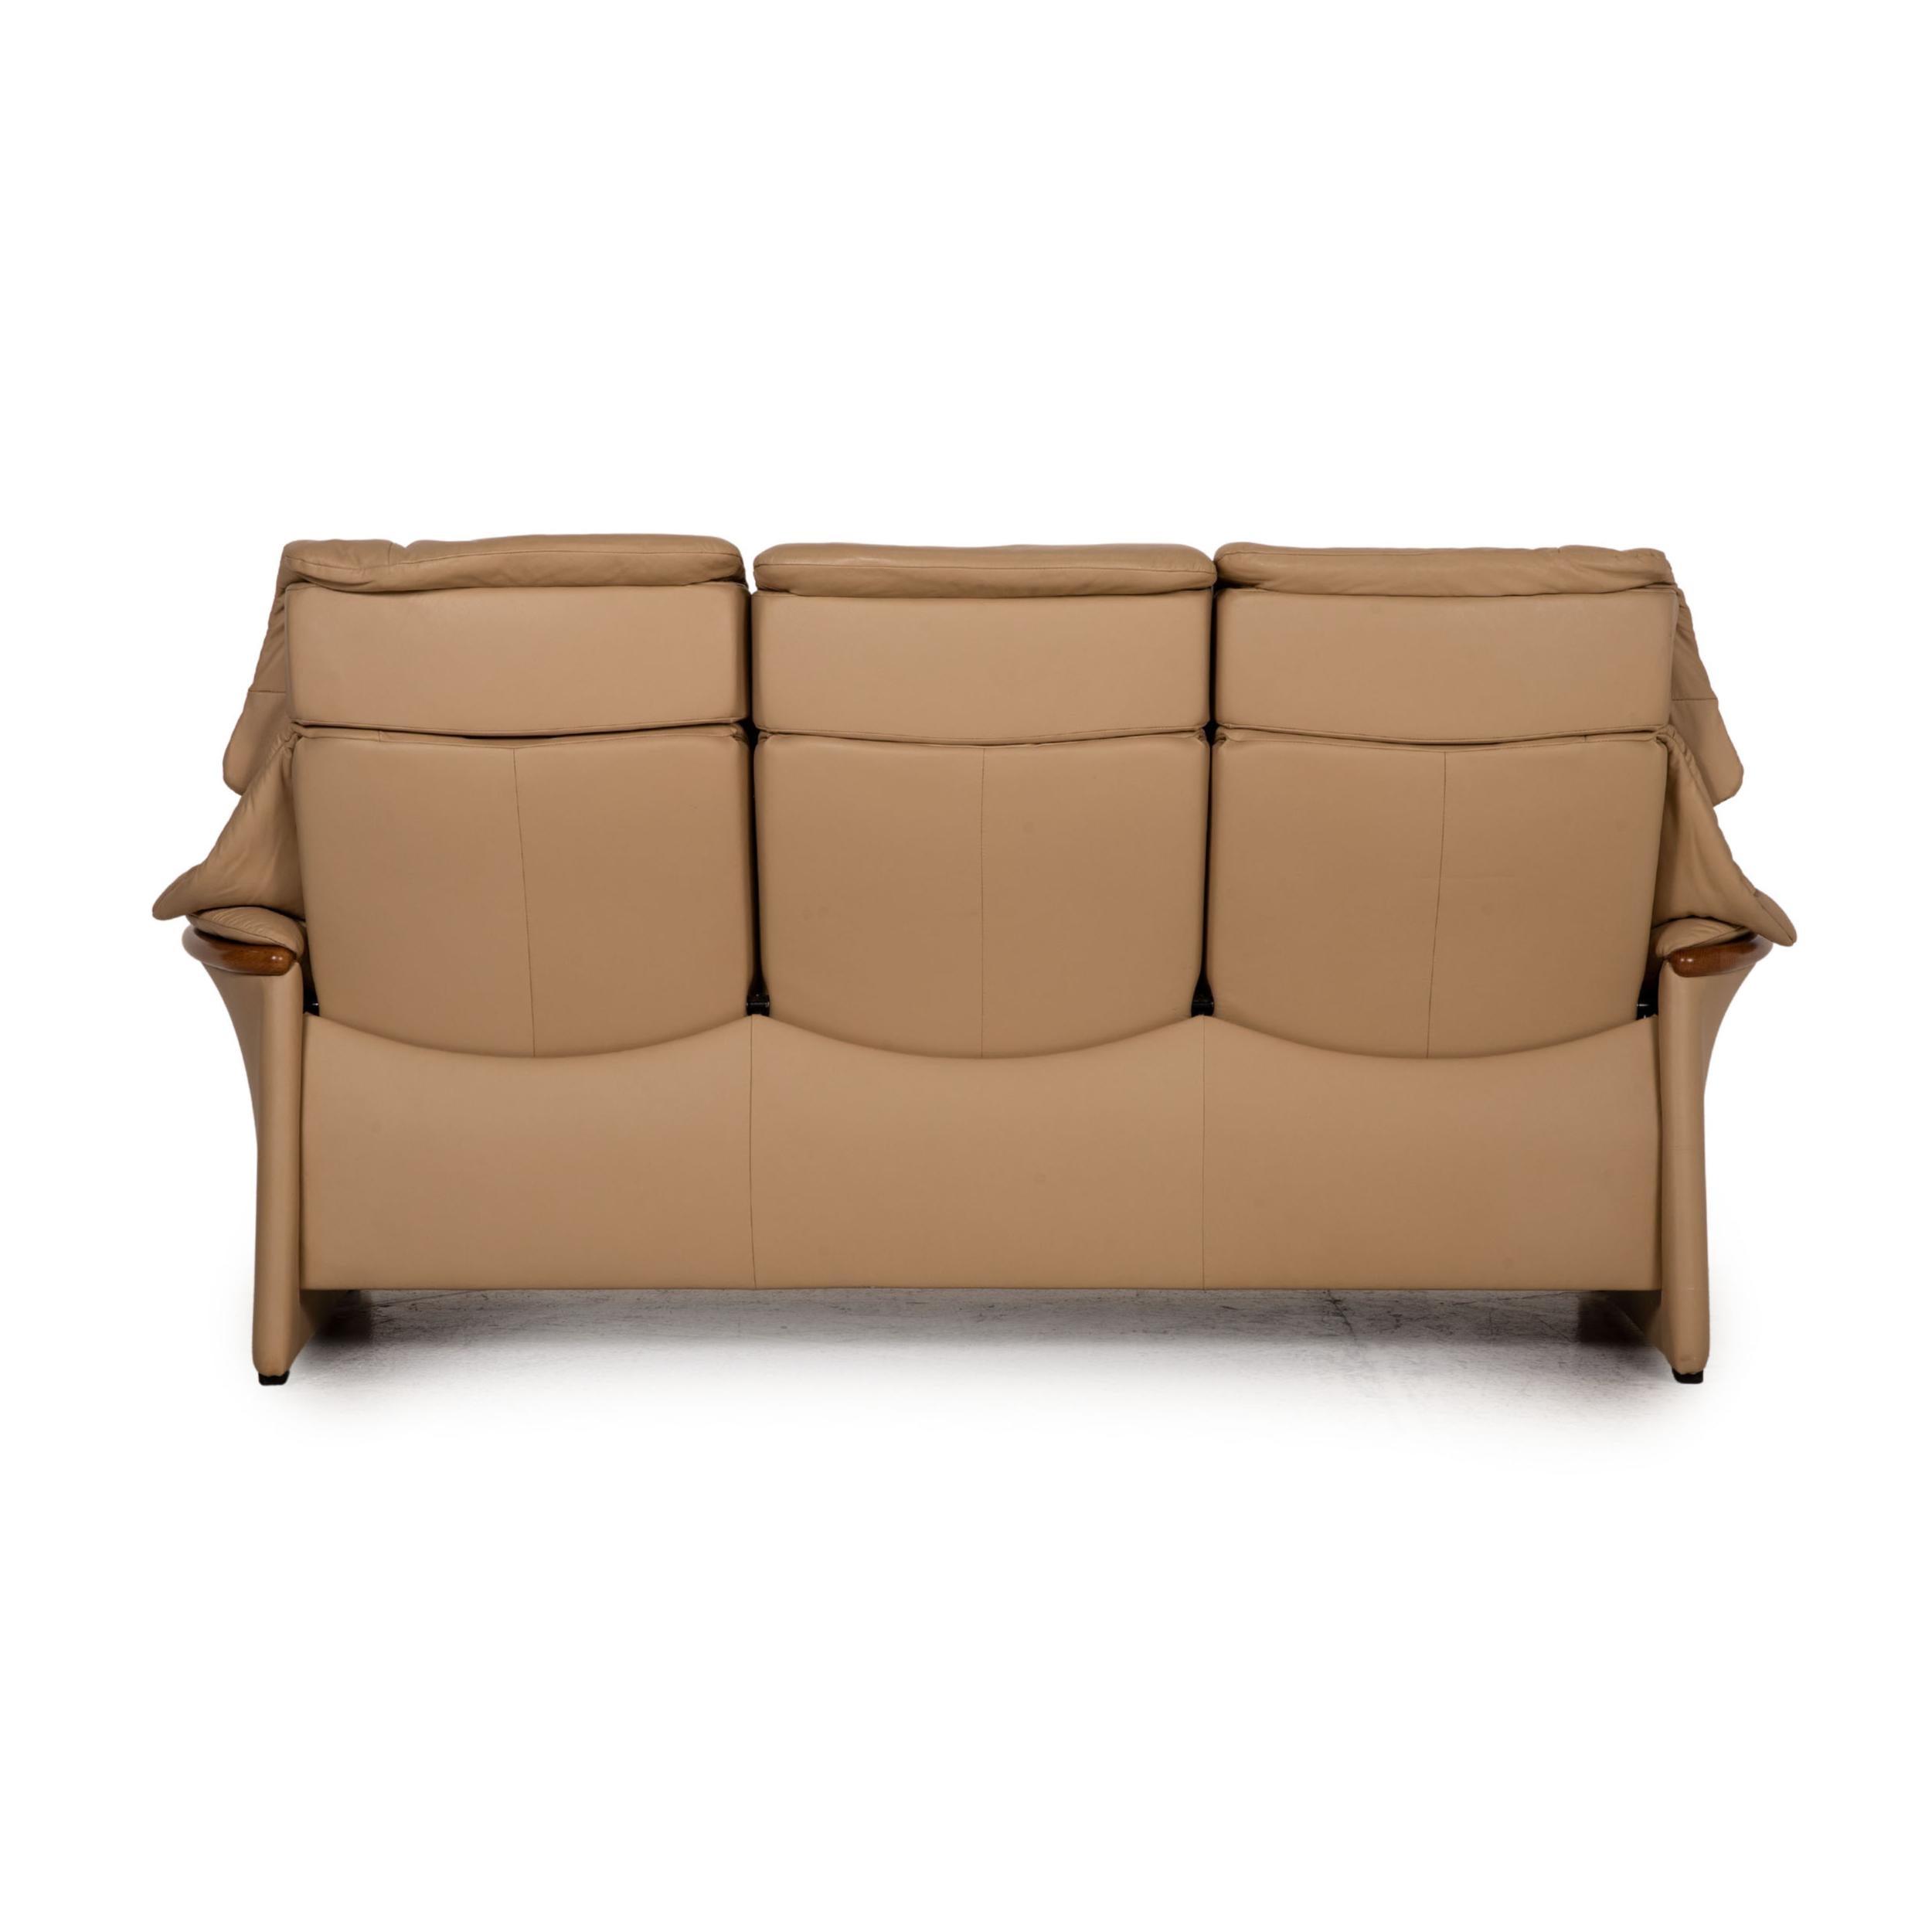 Stressless Eldorado Leather Sofa Beige Three Seater Couch For Sale 1